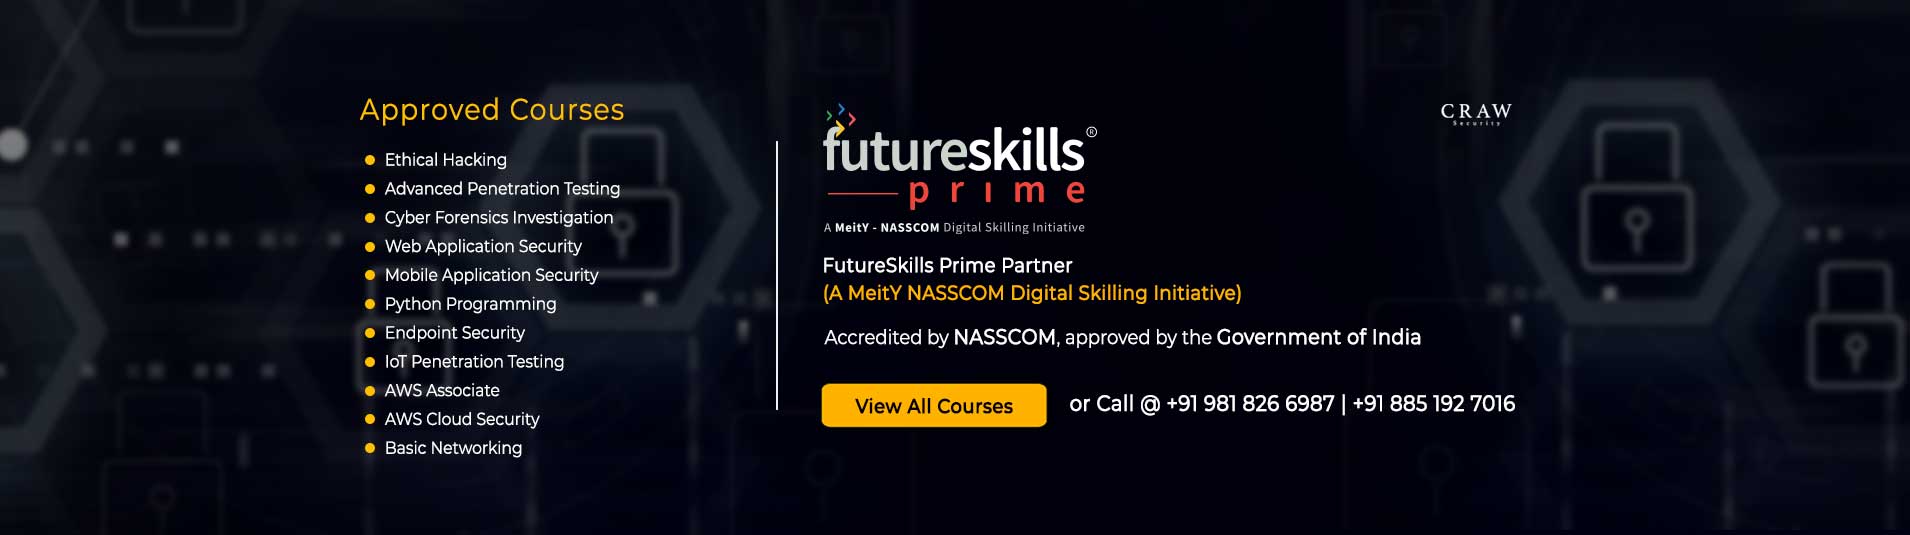 approved-courses-futureskills